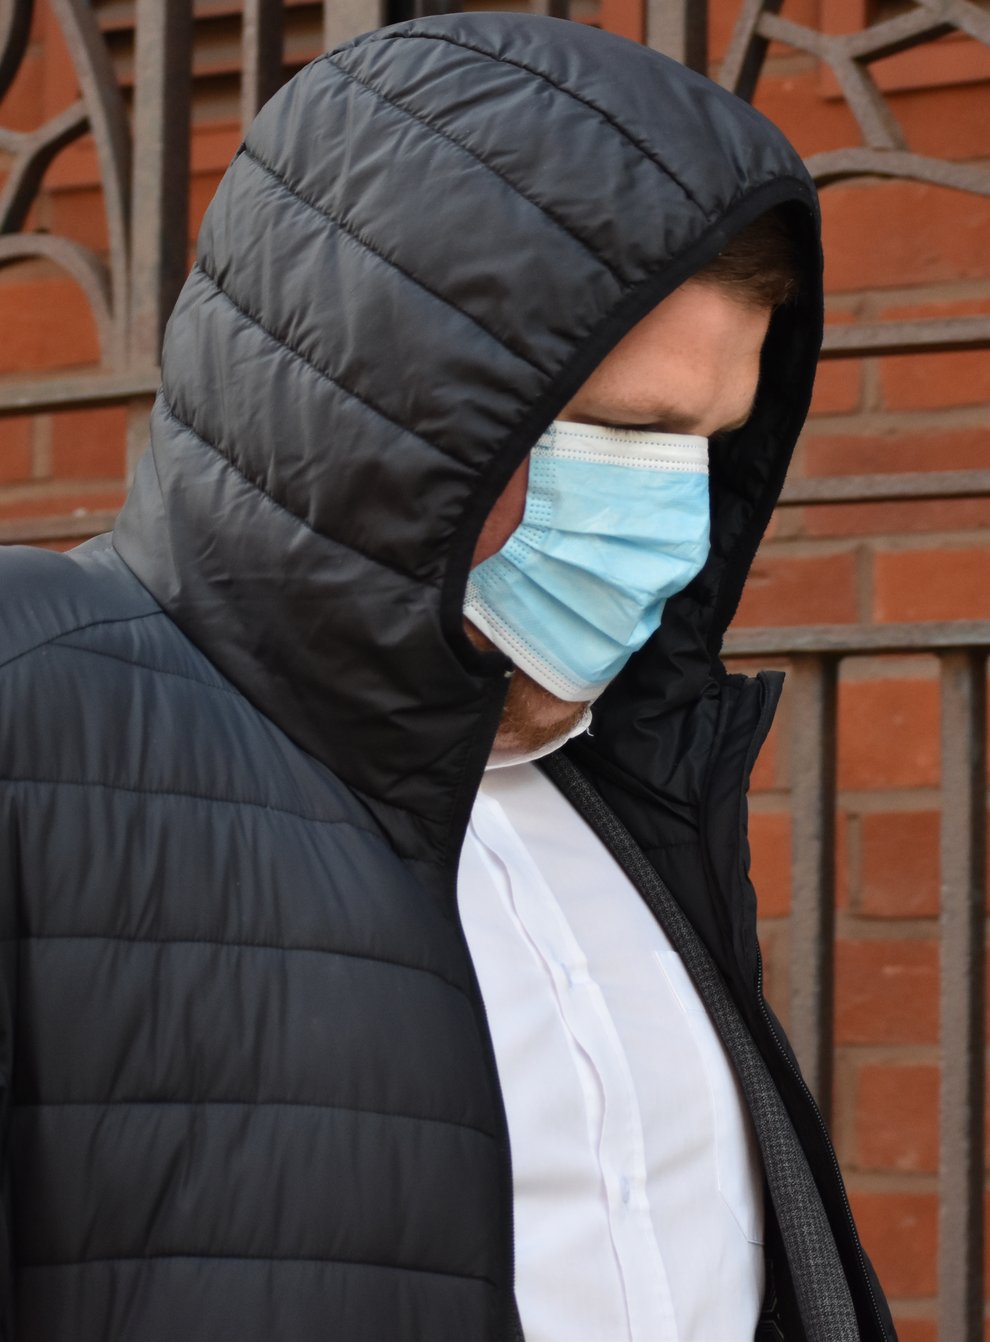 James Watts, leaving Birmingham Magistrates’ Court after admitting ten offences relating to racist memes, including four mocking the death of George Floyd (Matthew Cooper/PA)